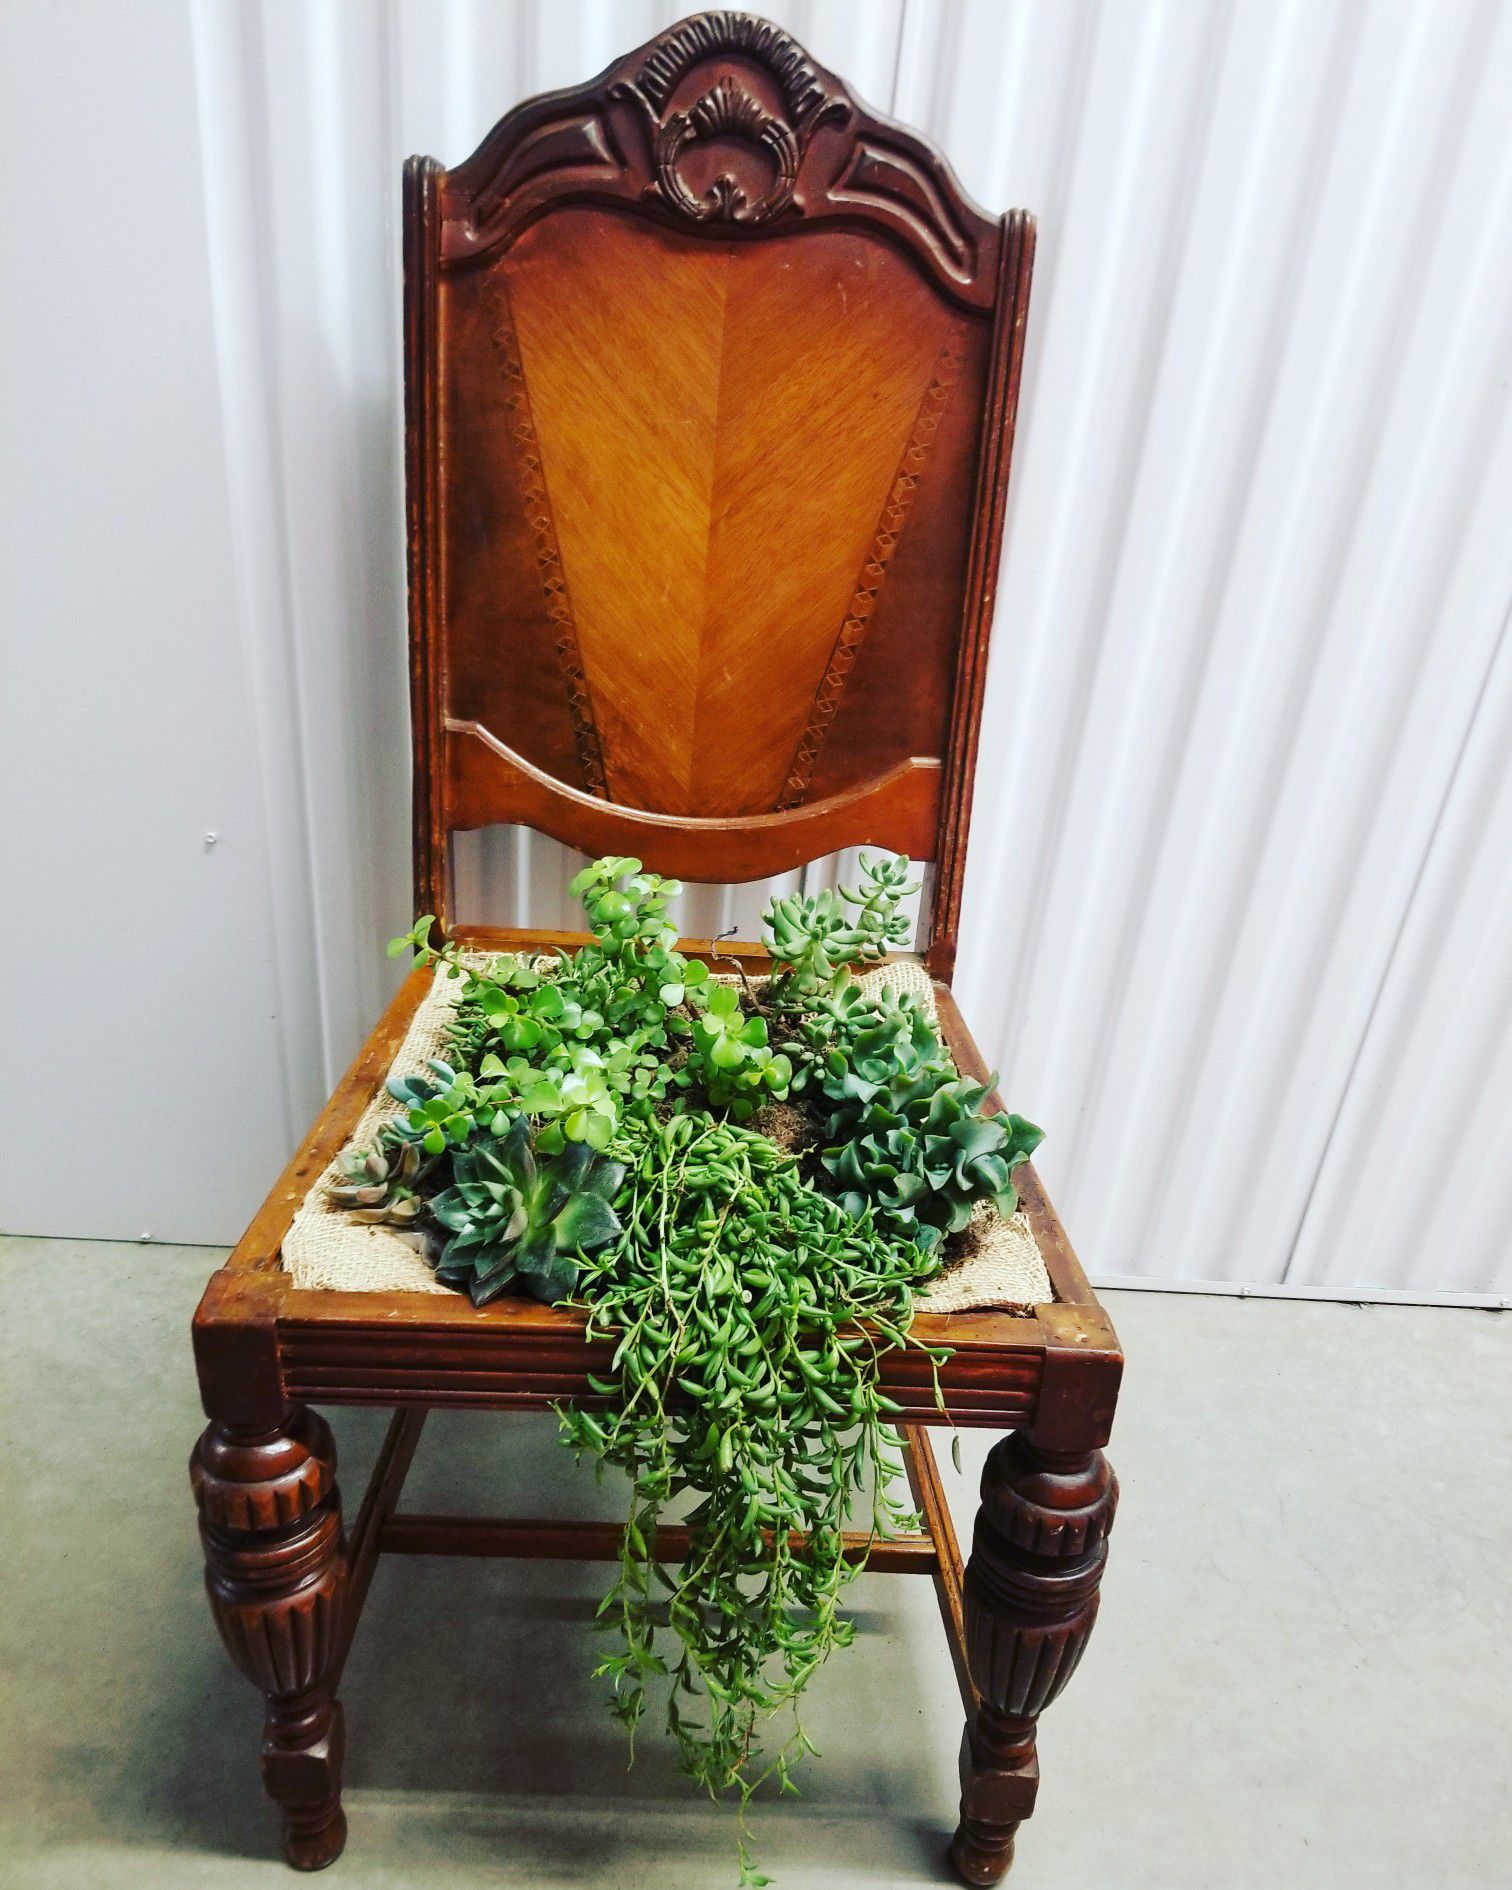 Antique chair with succulents